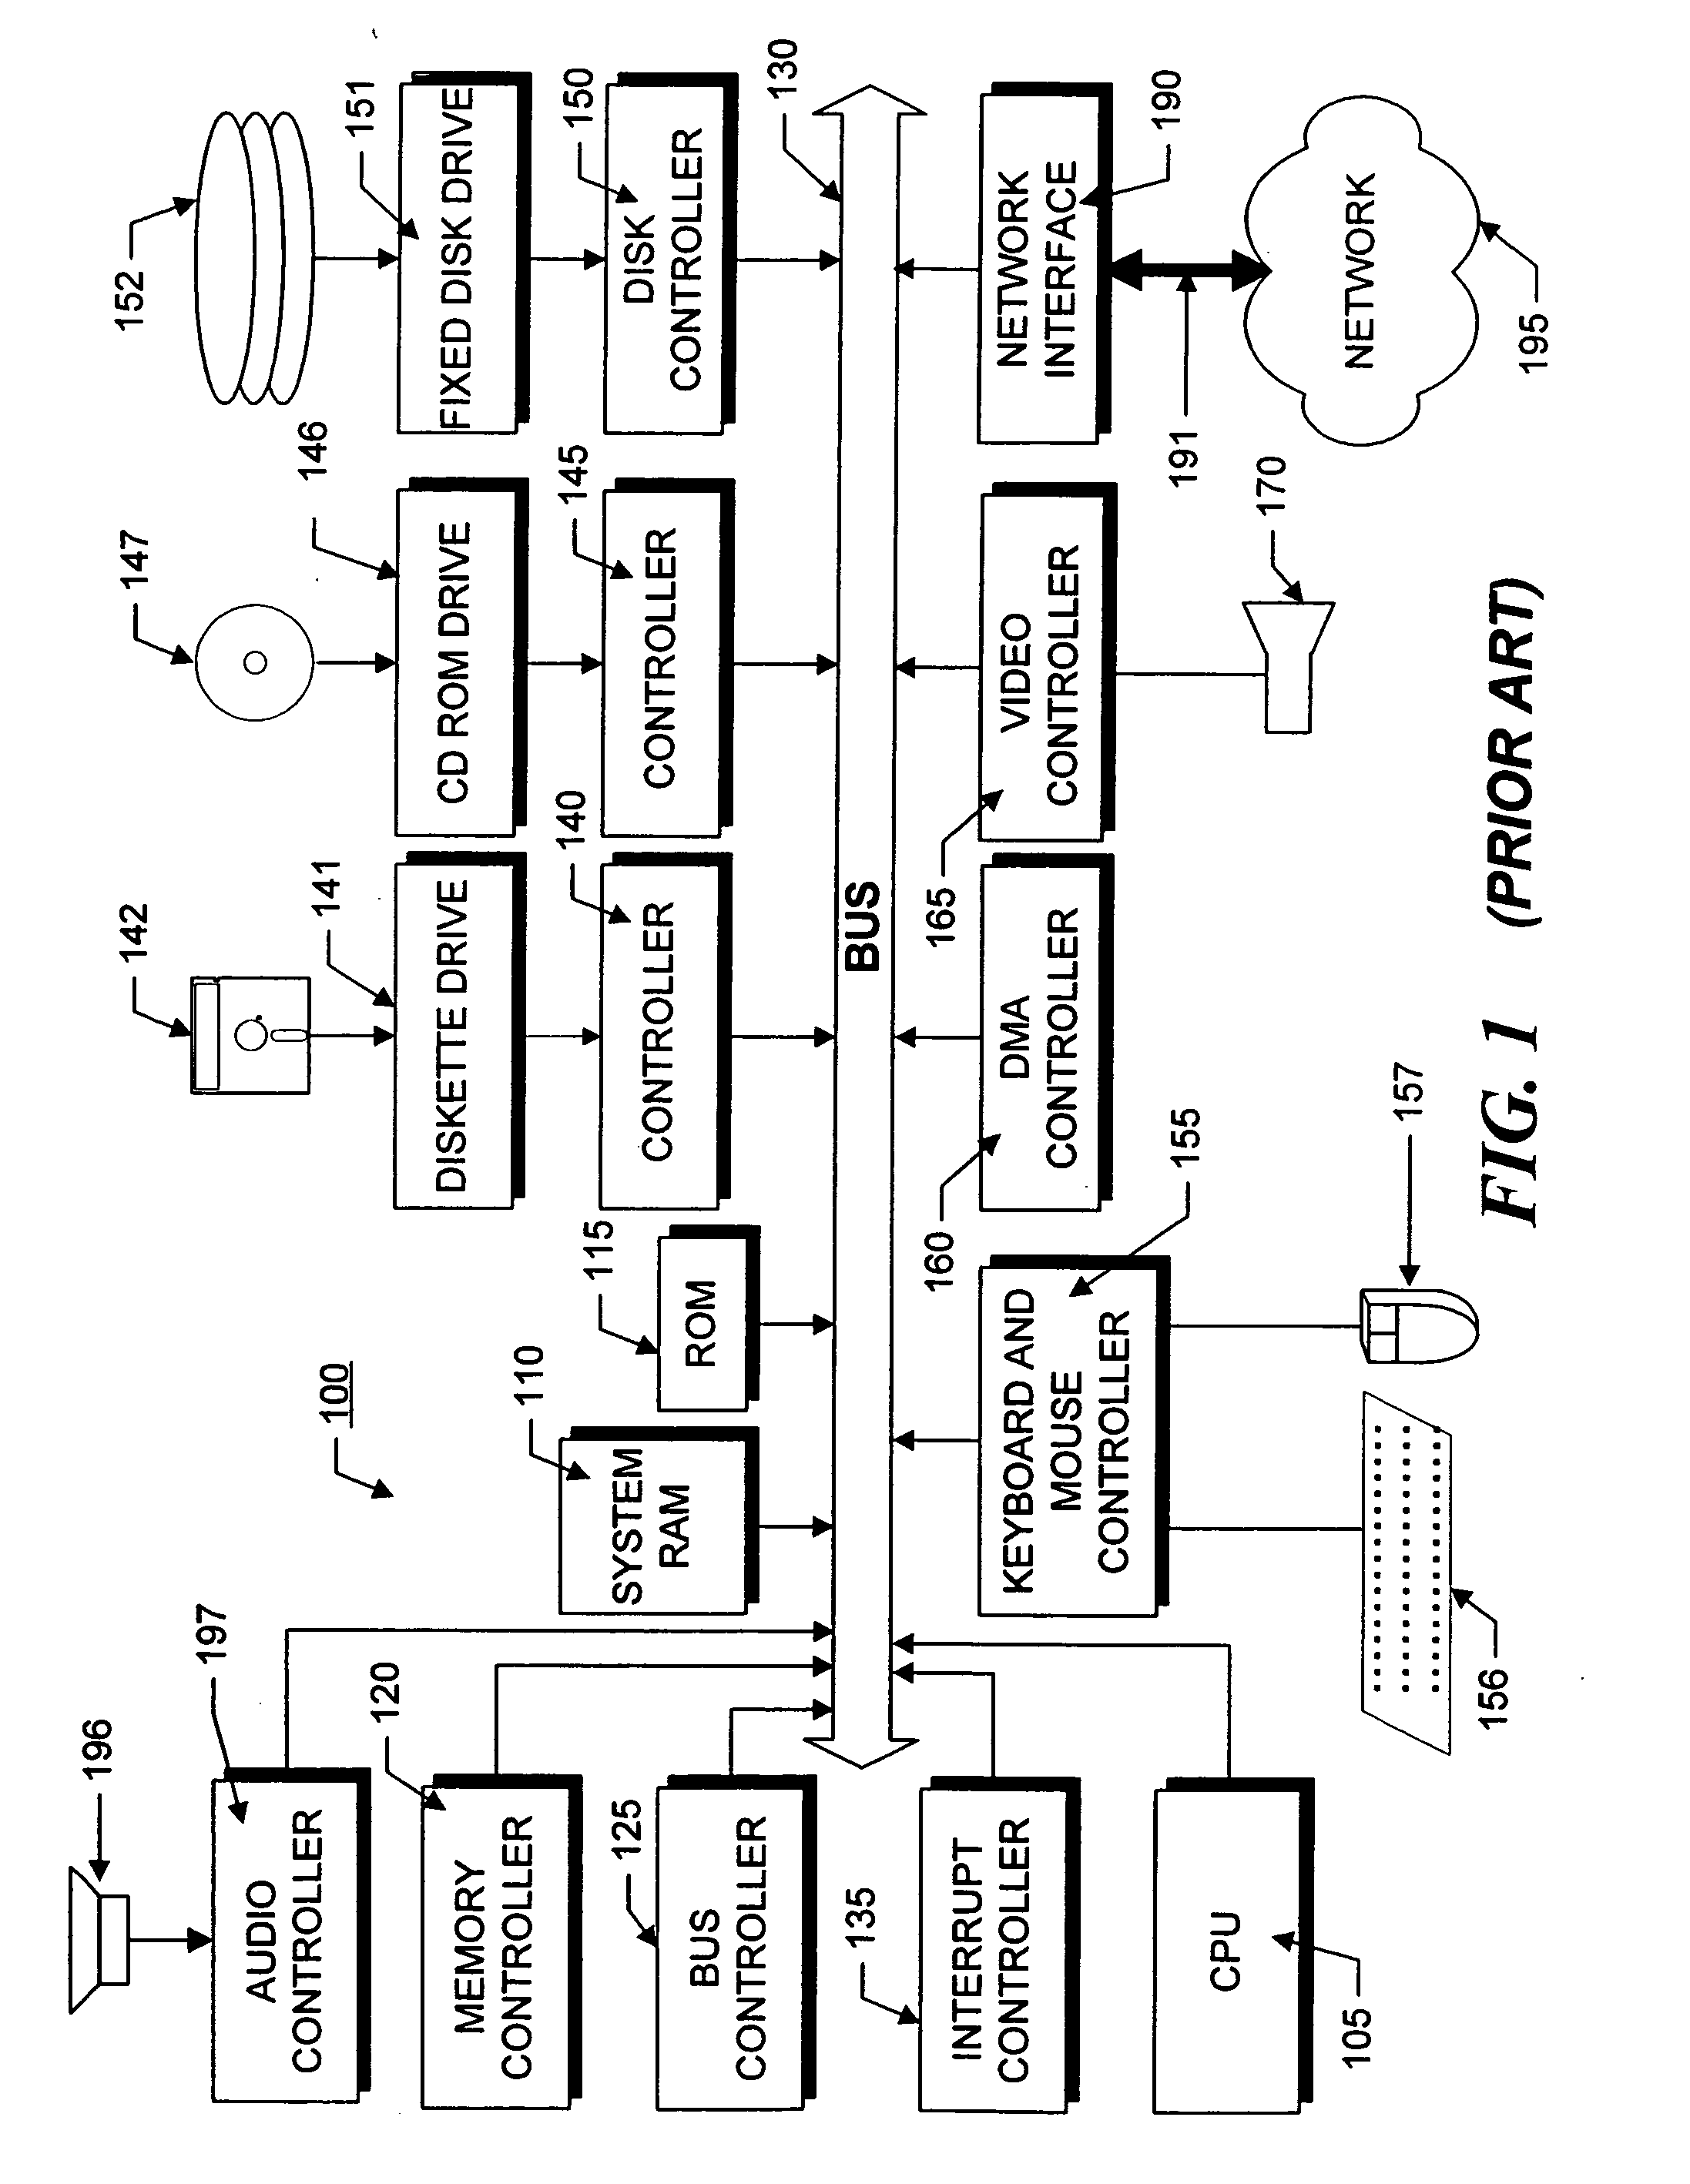 Method and apparatus for efficient management of XML documents